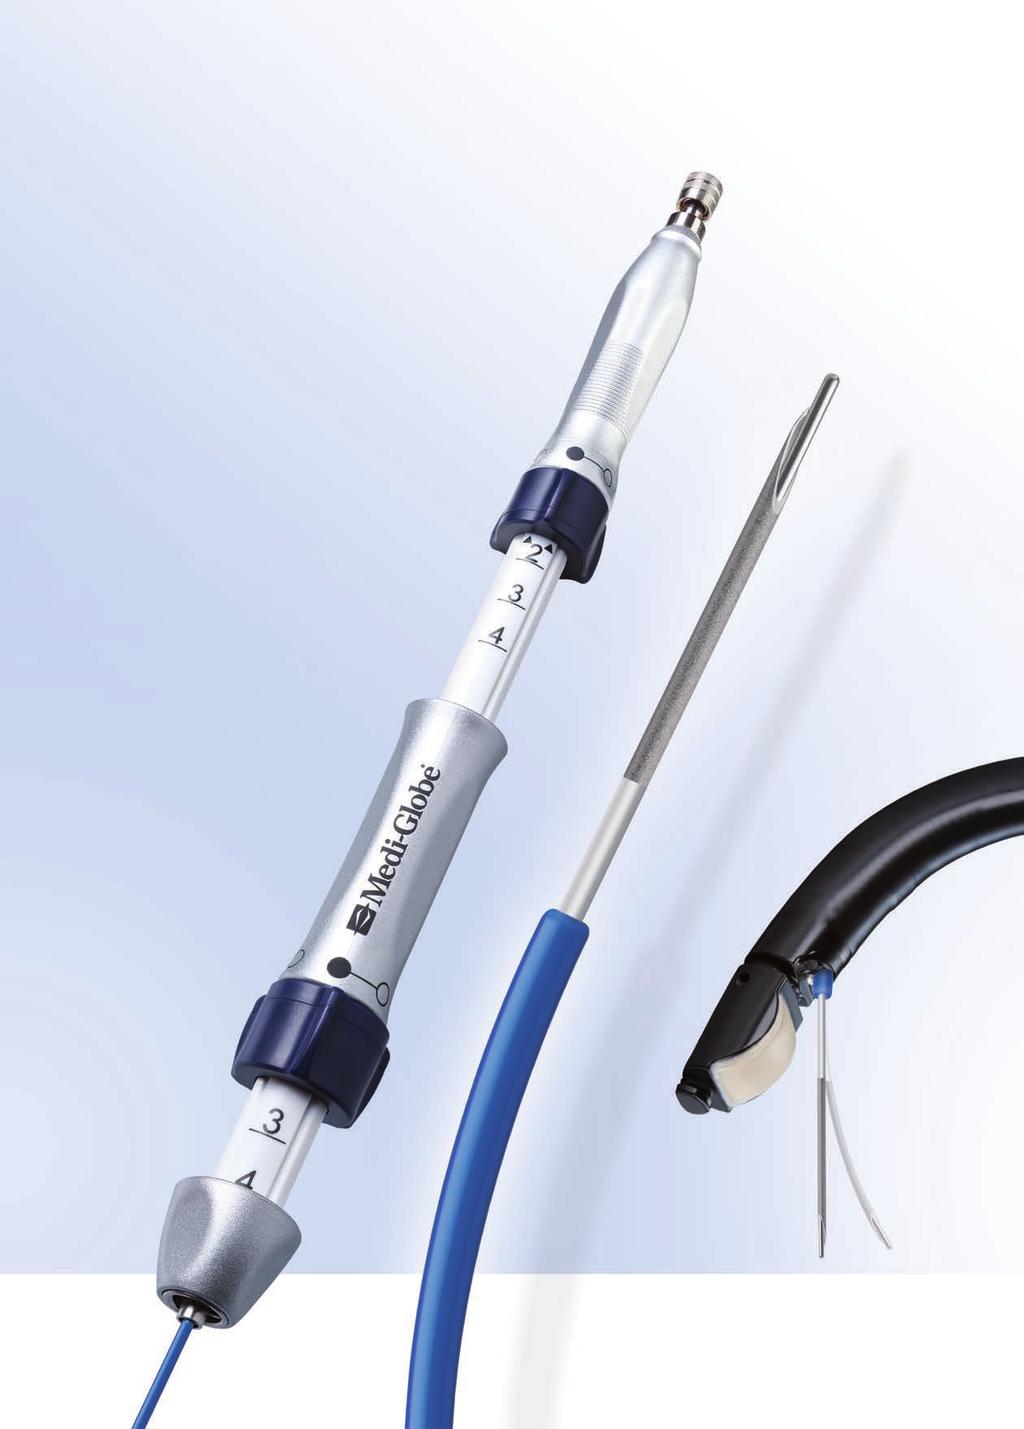 SonoTip EBUS Pro Flex Endobronchial Ultrasound-Guided TBNA System Single Use Dimensionally Stable Nitinol Needle The Unique Memory Properties of the Nitinol Needle Prevents Permanent Needle Bend